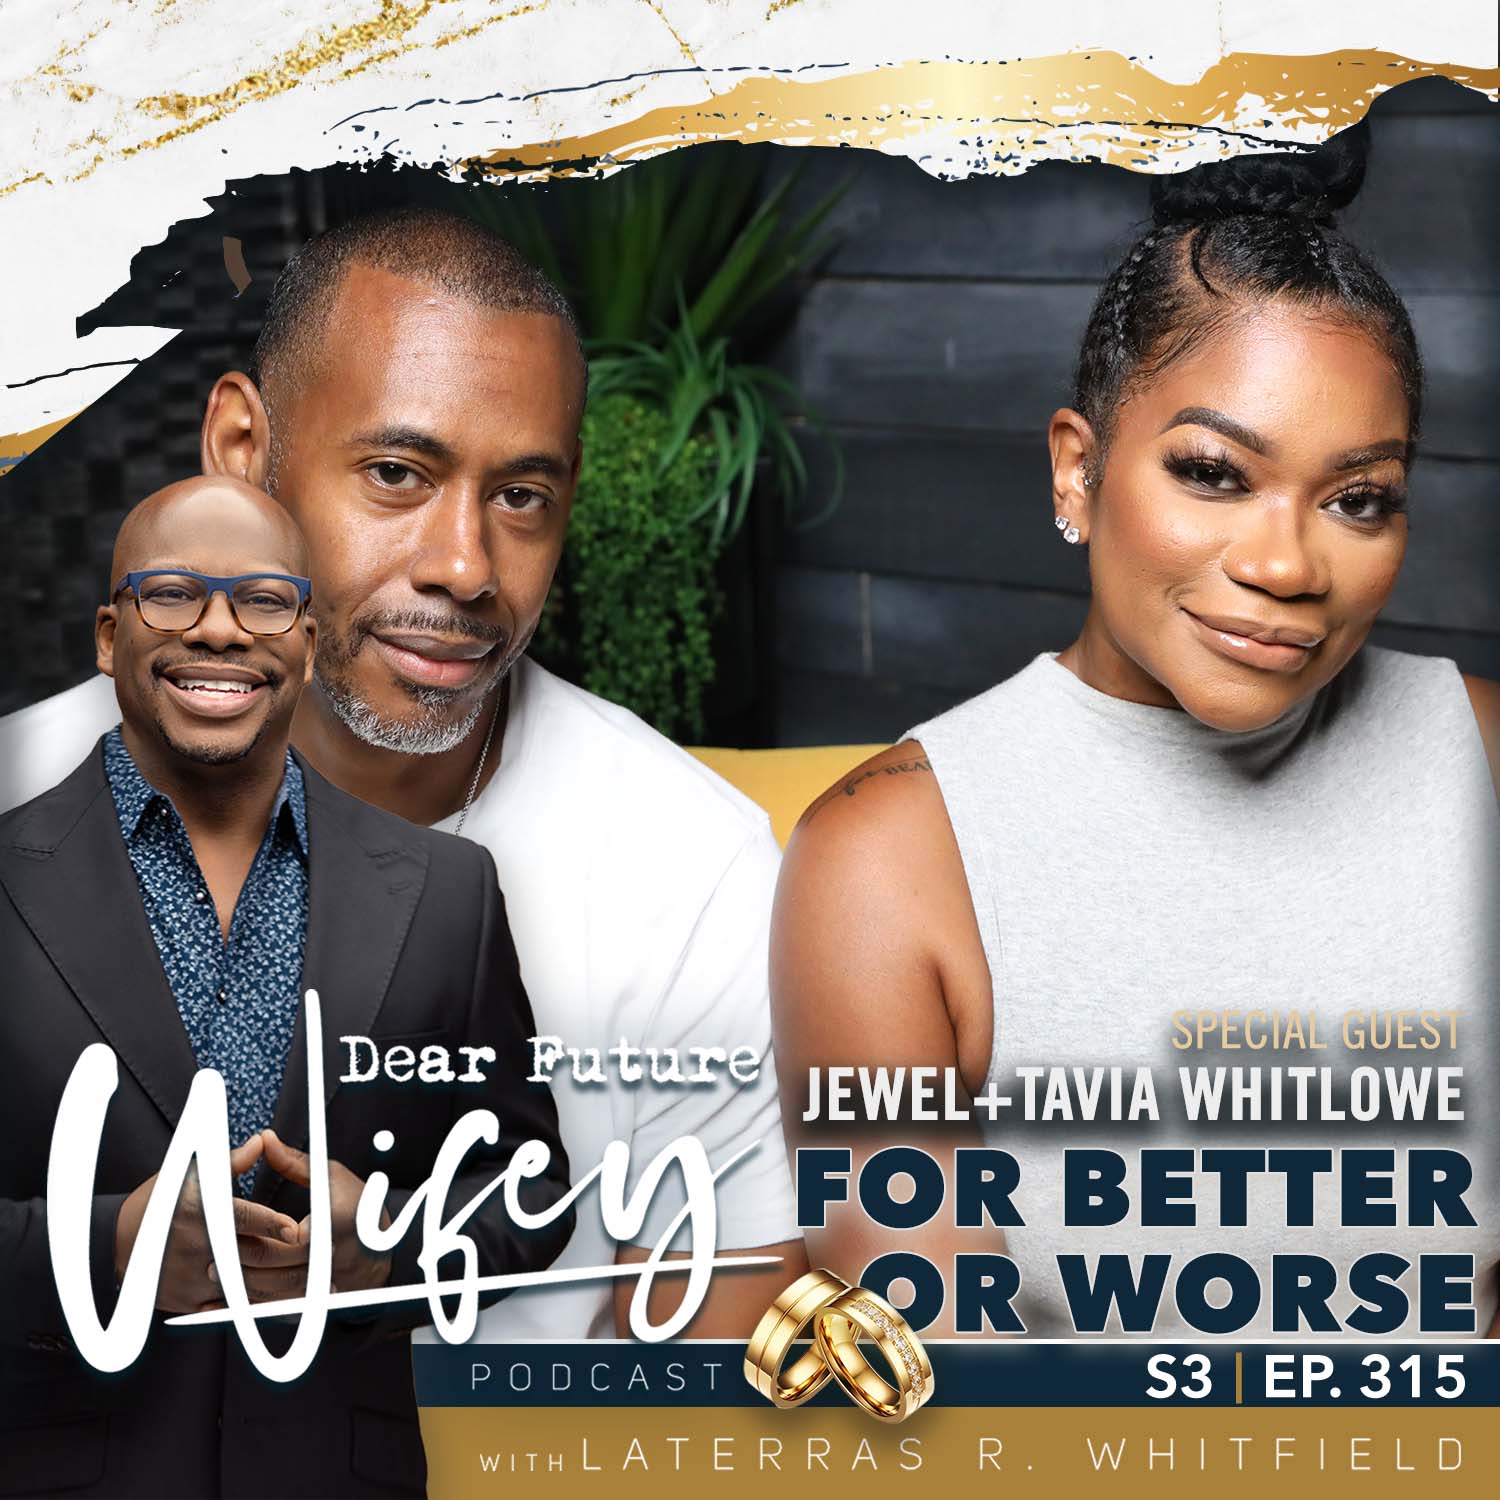 For Better or Worse (Guests: Jewel & Tavia Whitlowe)